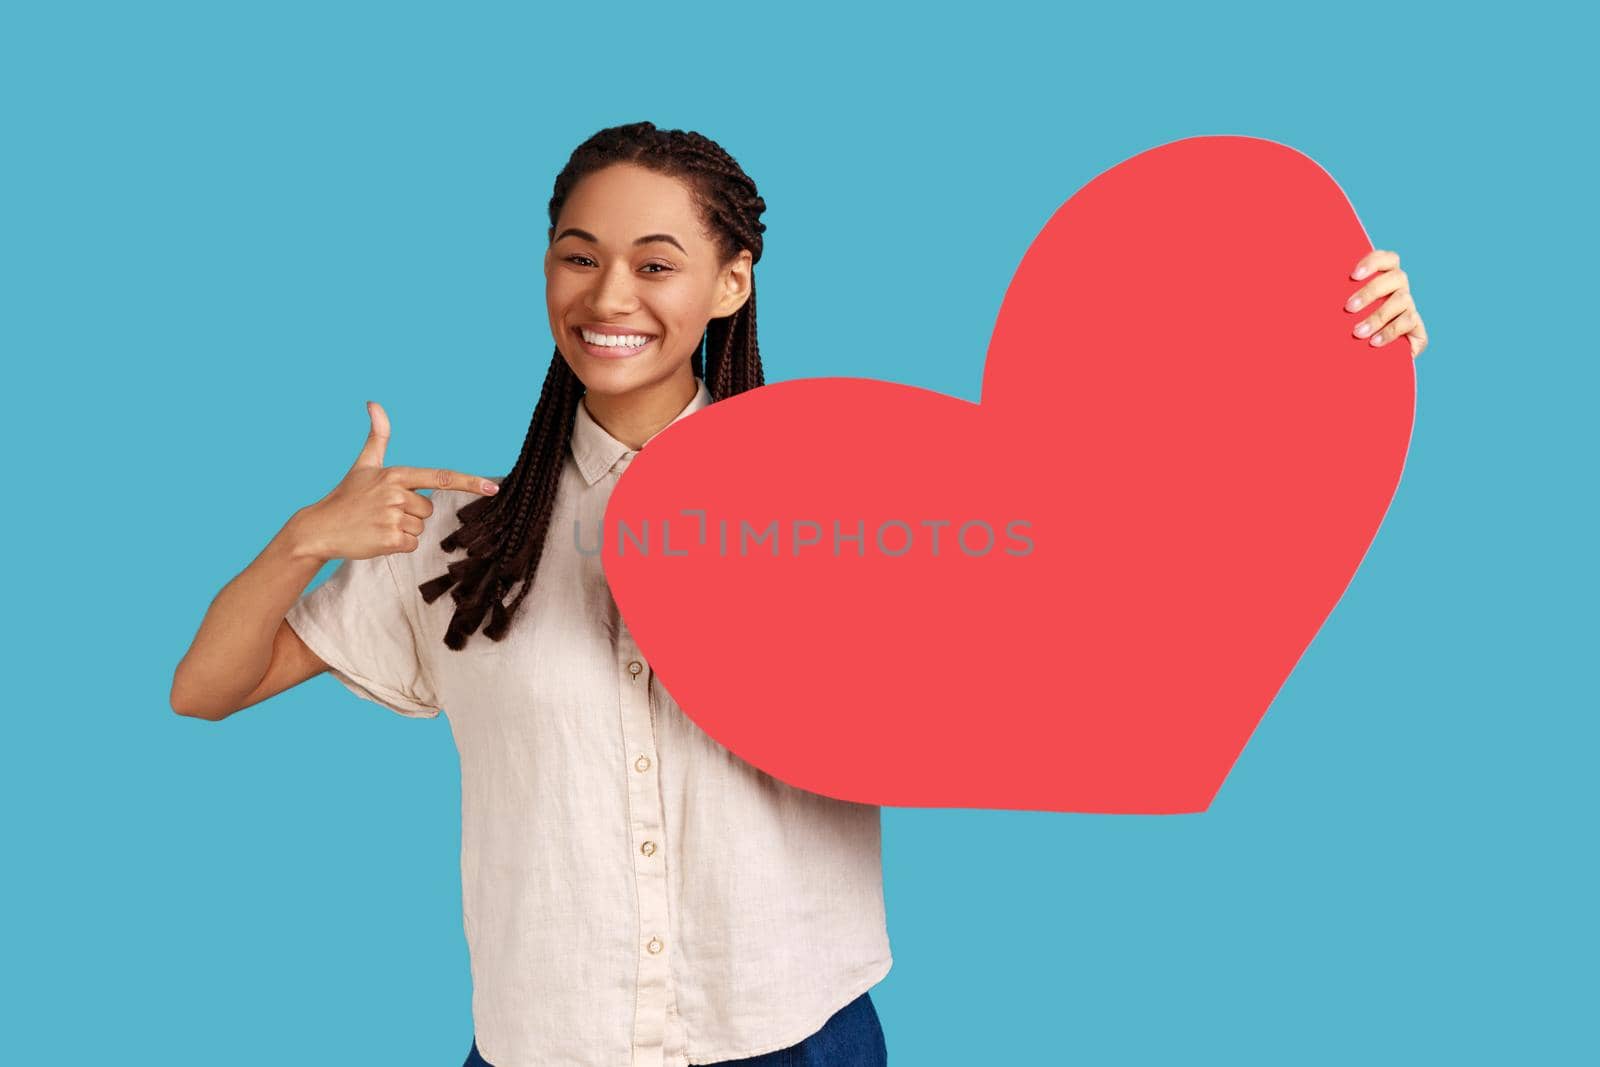 Woman with black dreadlocks pointing at big red paper heart and smiling, expressing extreme joy. by Khosro1